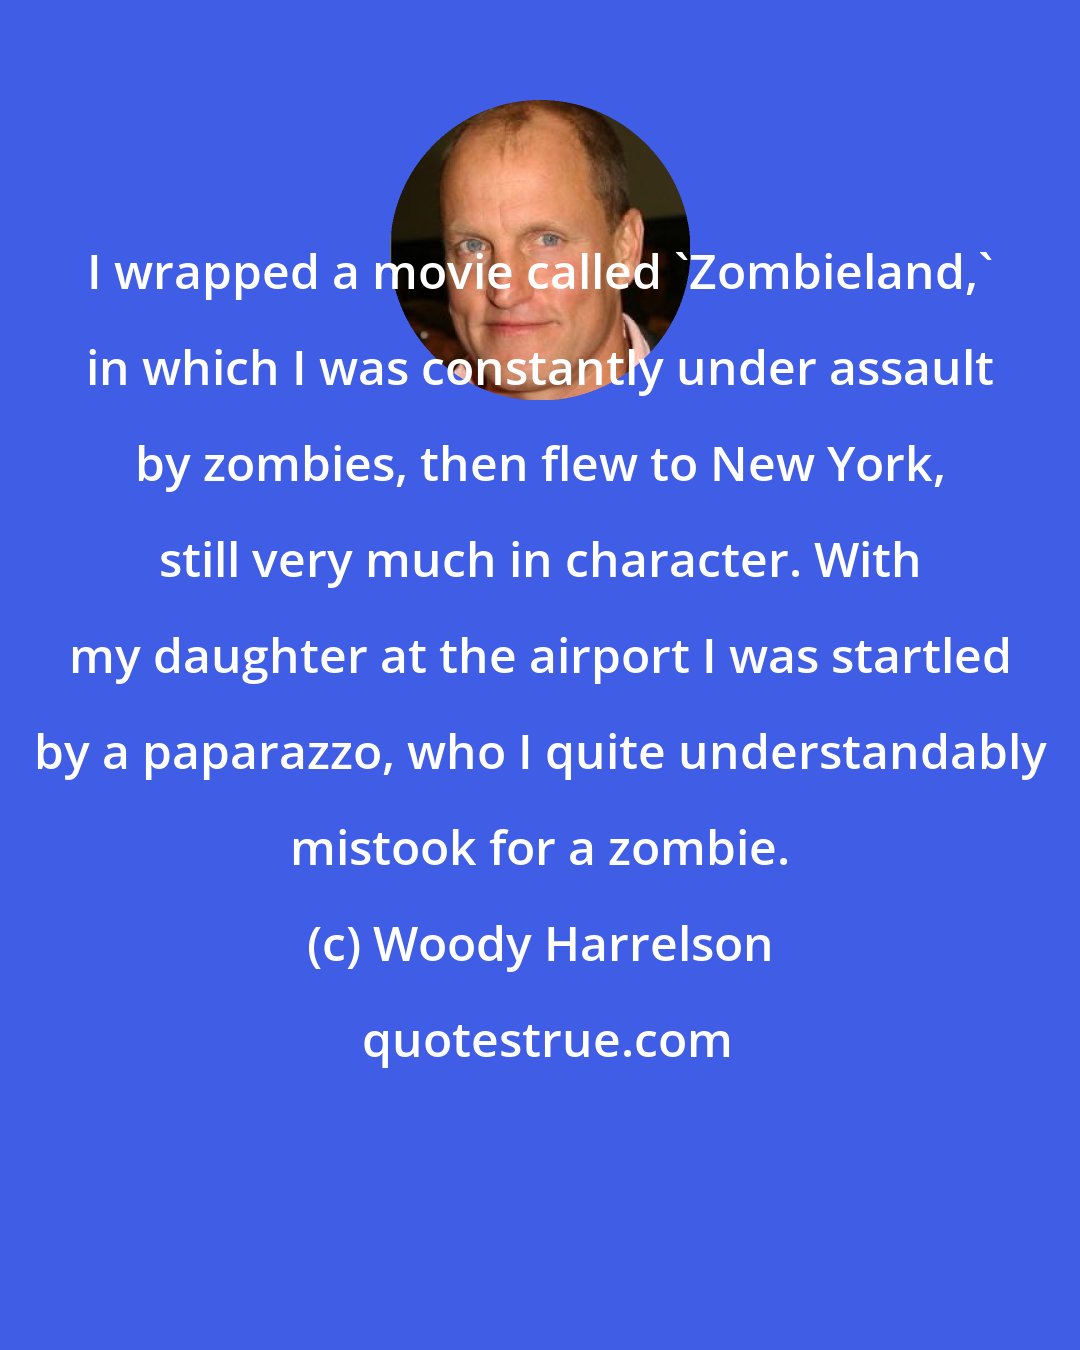 Woody Harrelson: I wrapped a movie called 'Zombieland,' in which I was constantly under assault by zombies, then flew to New York, still very much in character. With my daughter at the airport I was startled by a paparazzo, who I quite understandably mistook for a zombie.